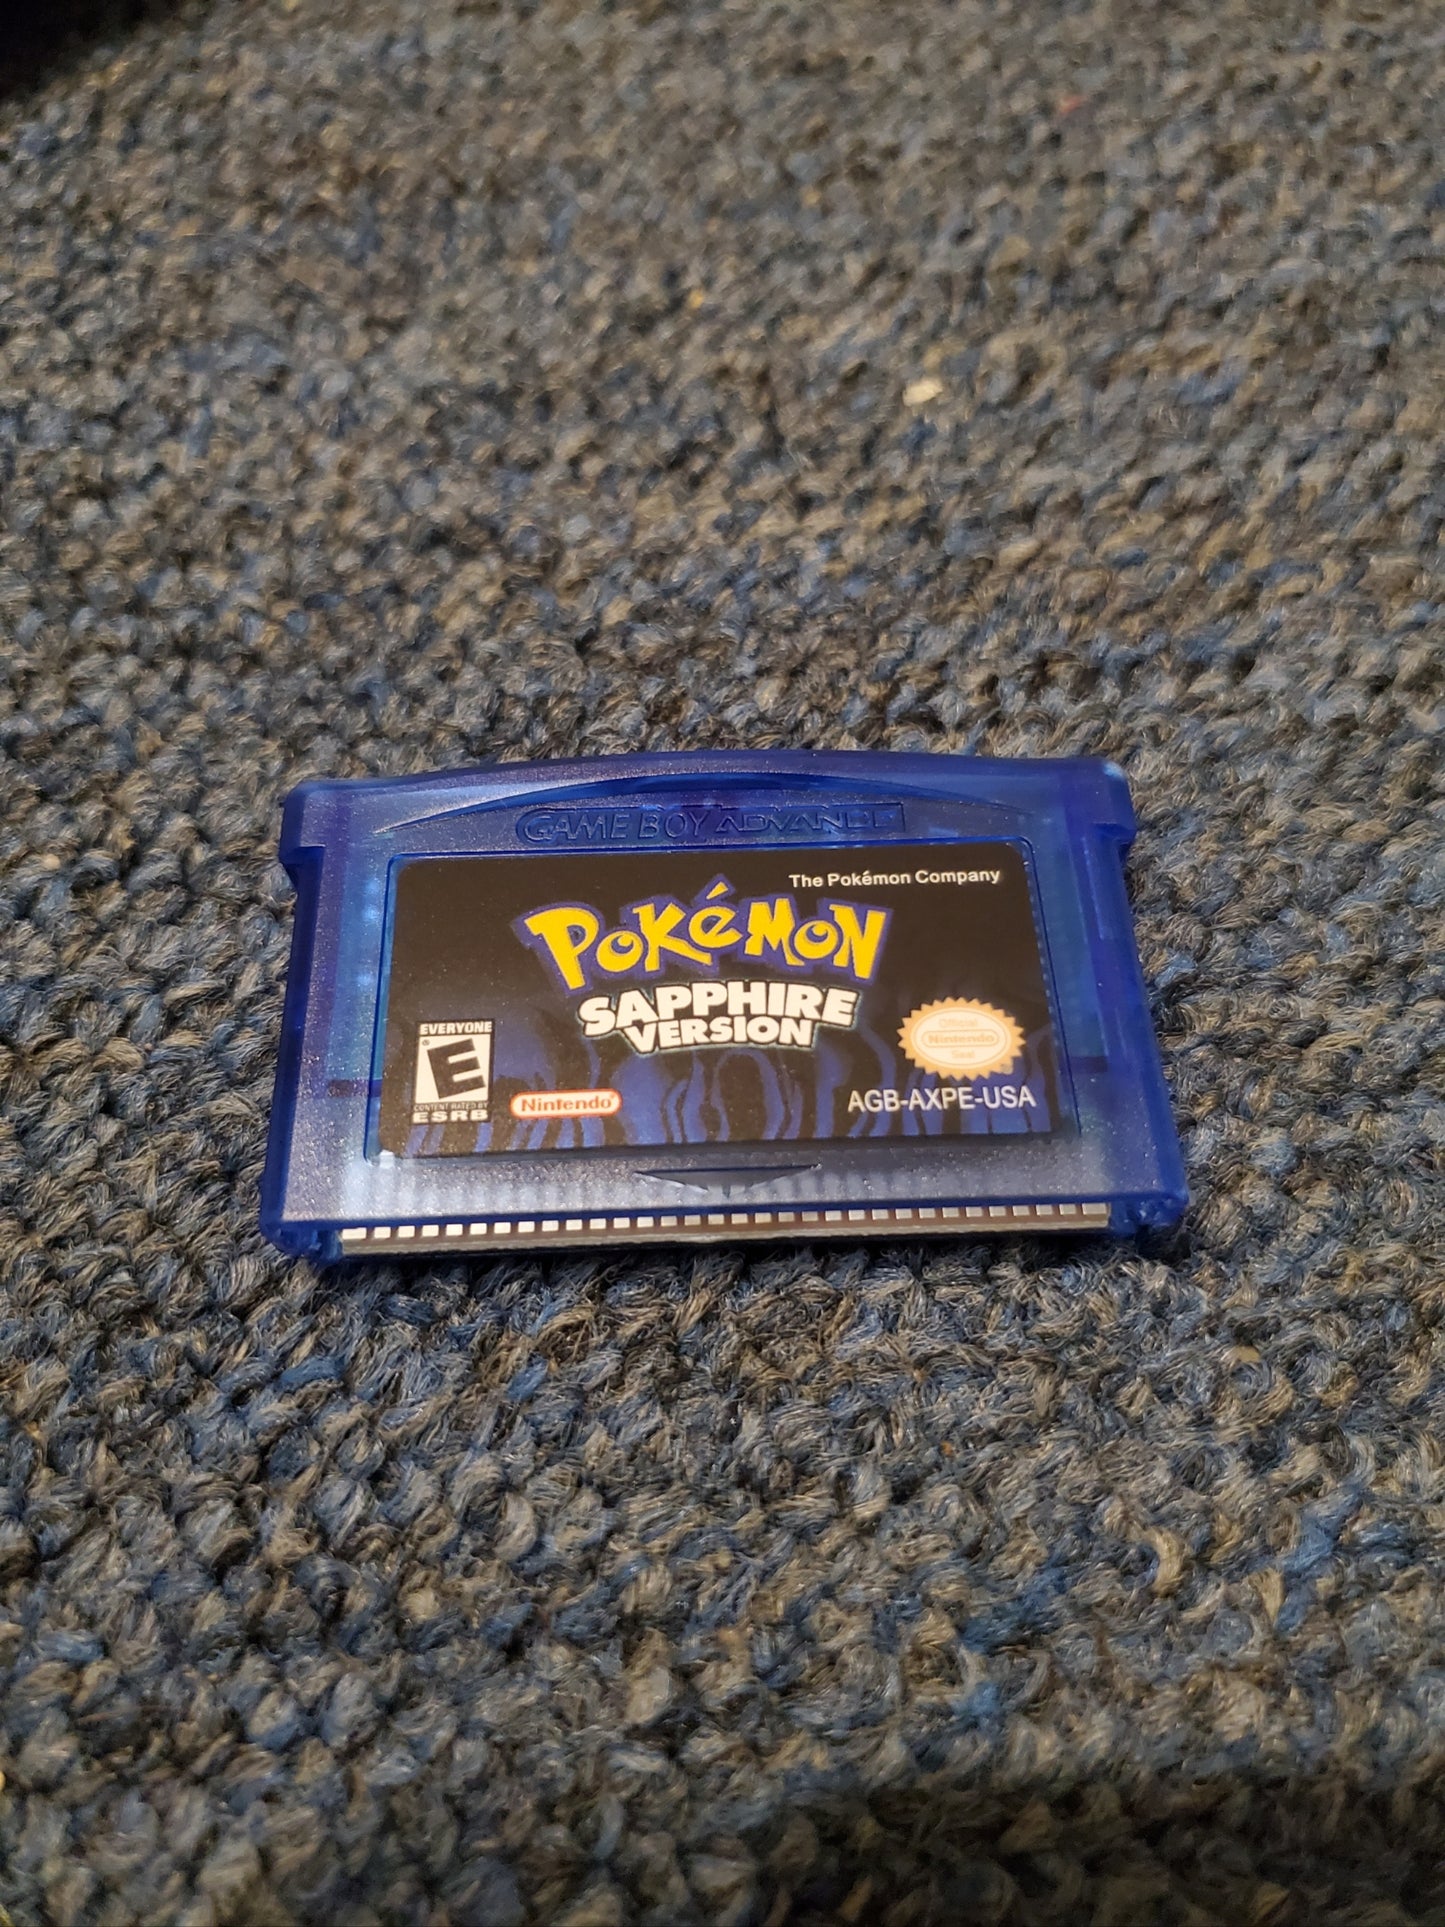 Pokemon Sapphire Version for Nintendo Gameboy Advance & Clear Protective Case